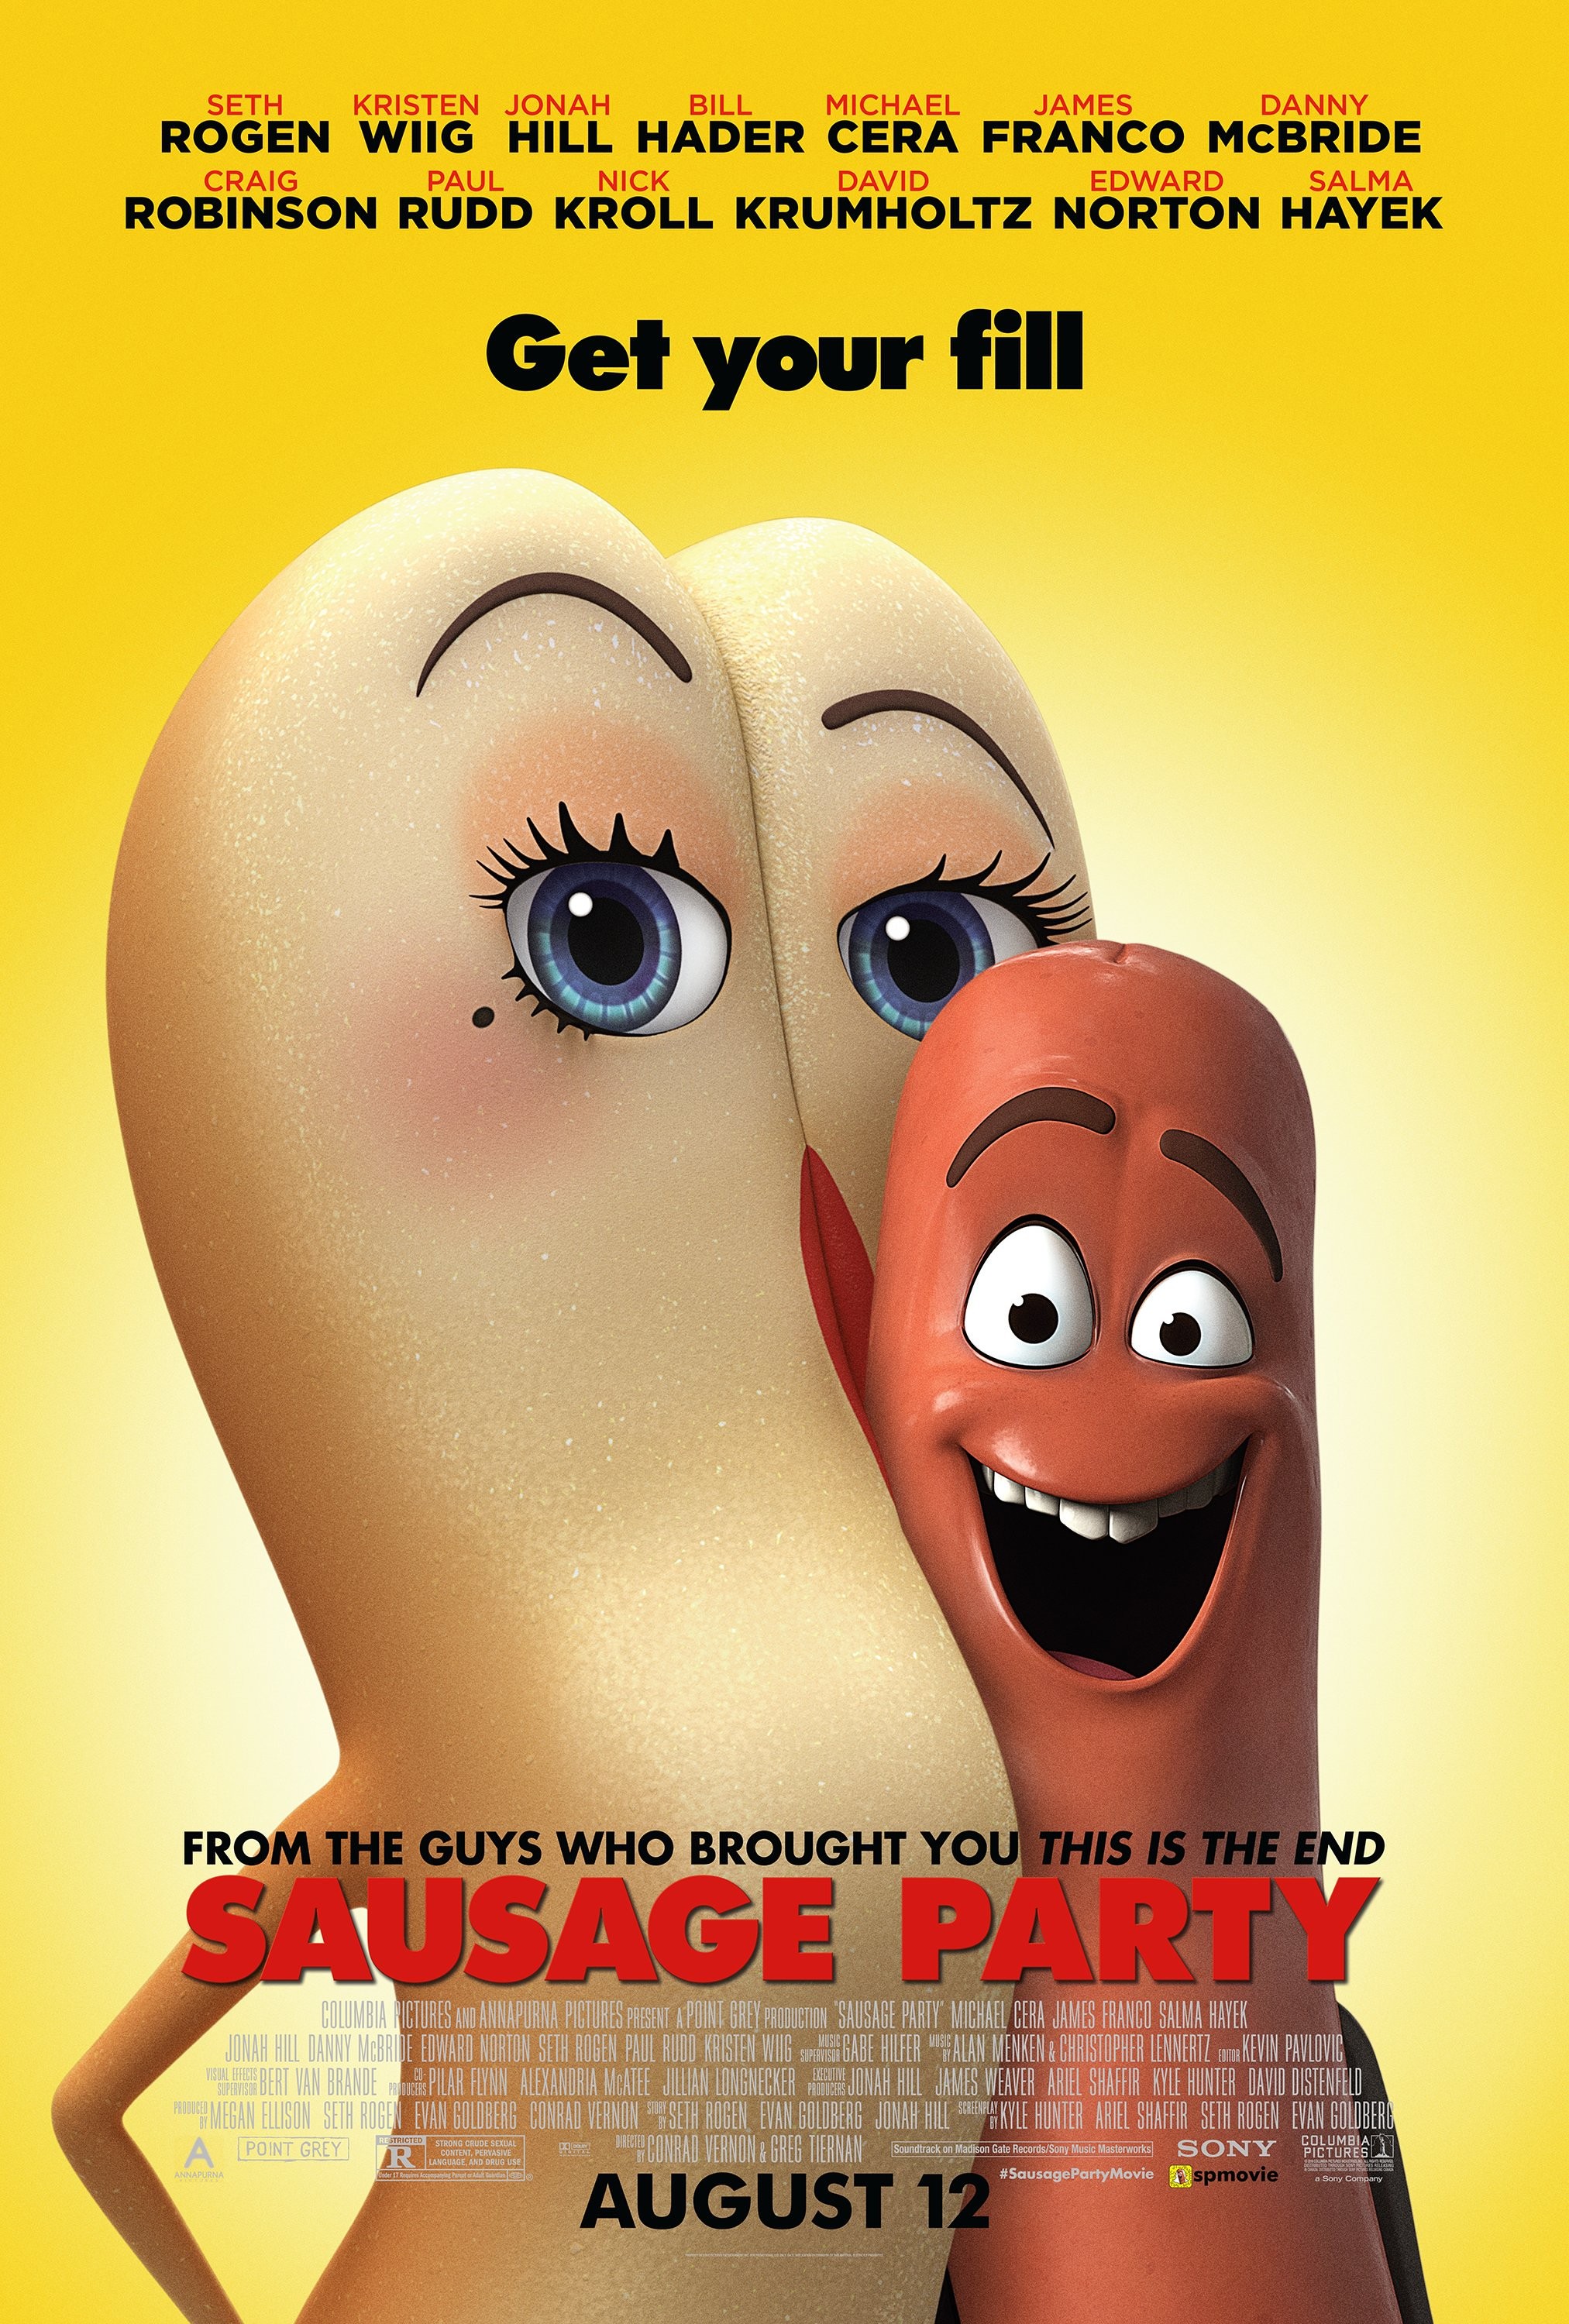 dave buehring share sausage party online download photos